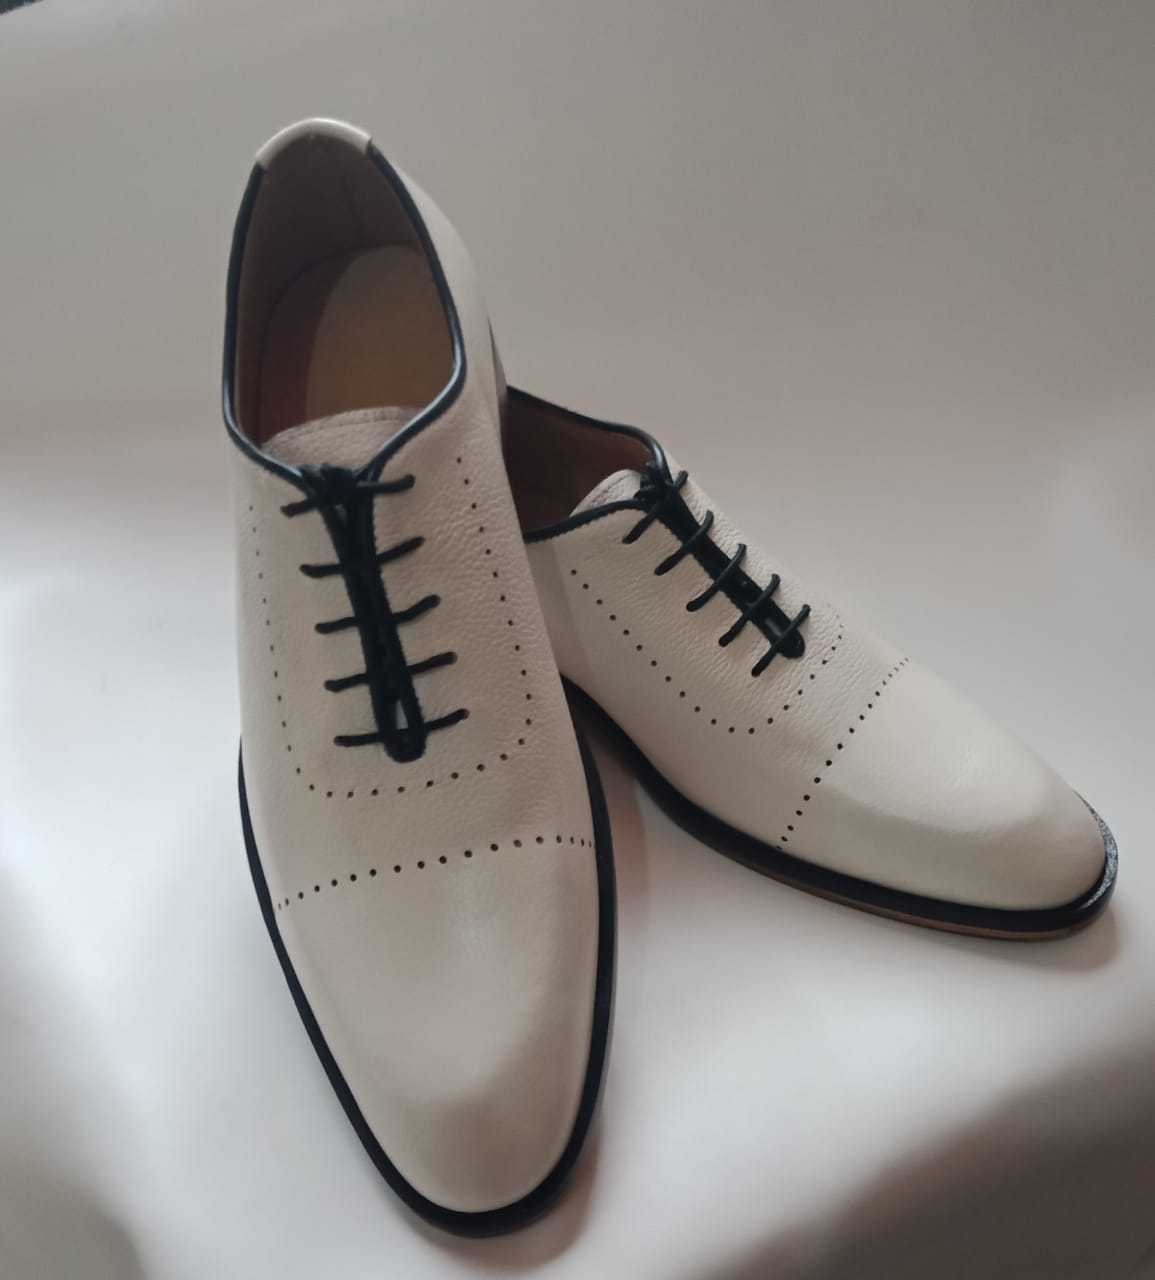 white party shoes for men